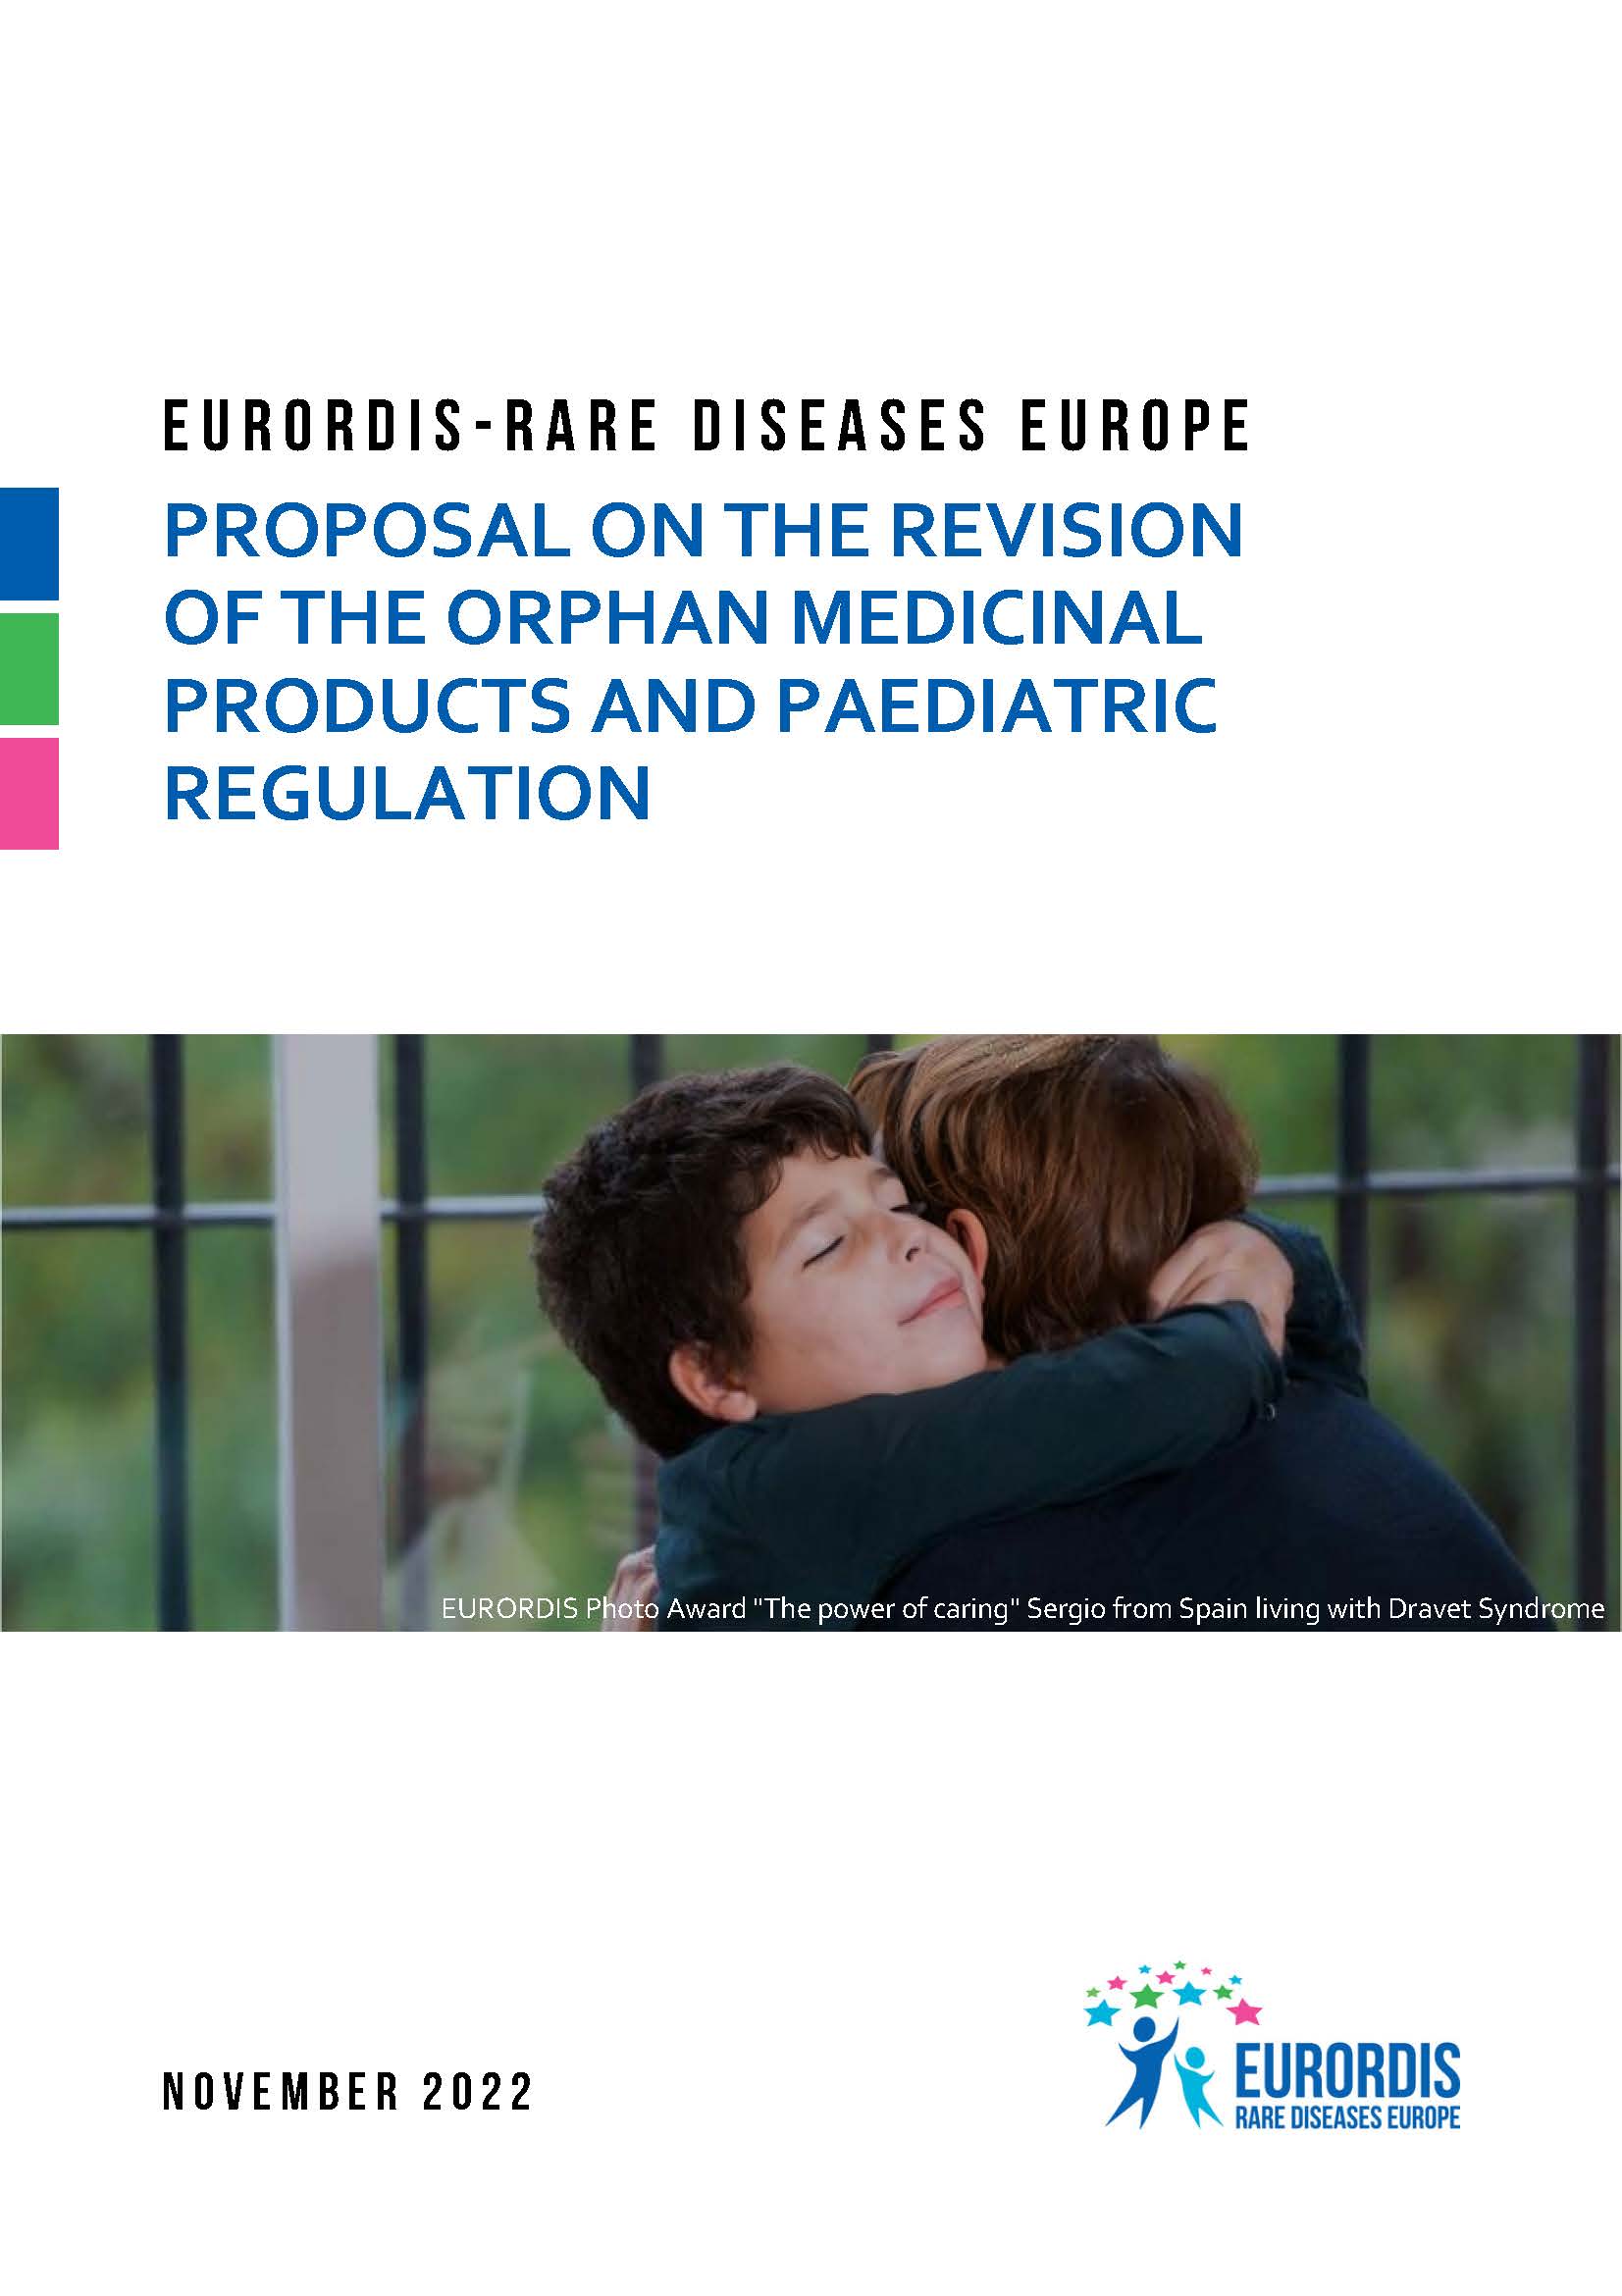 EURORDIS’ Proposal on the Revision of the Orphan Medicinal Products and Paediatric Regulation